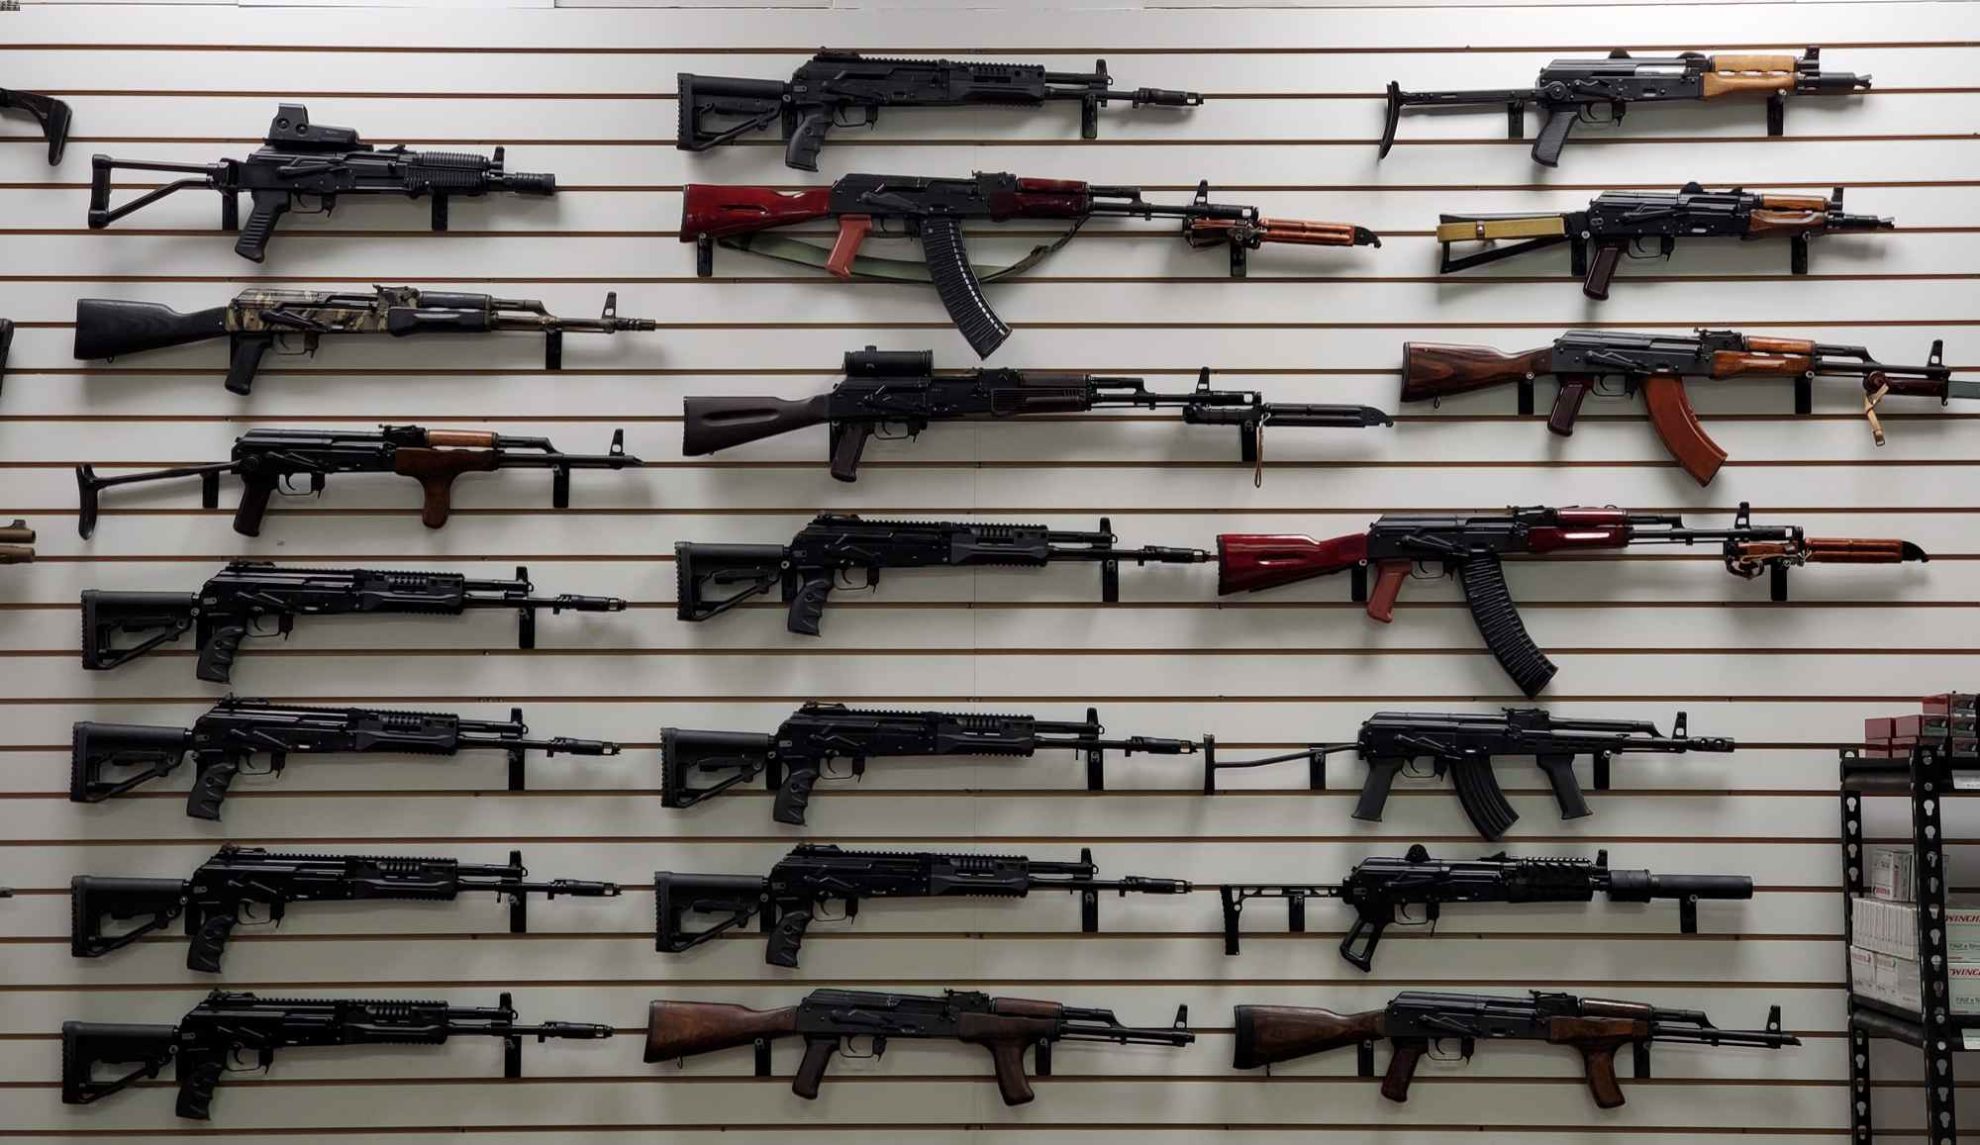 The Armory Wall of Firearms